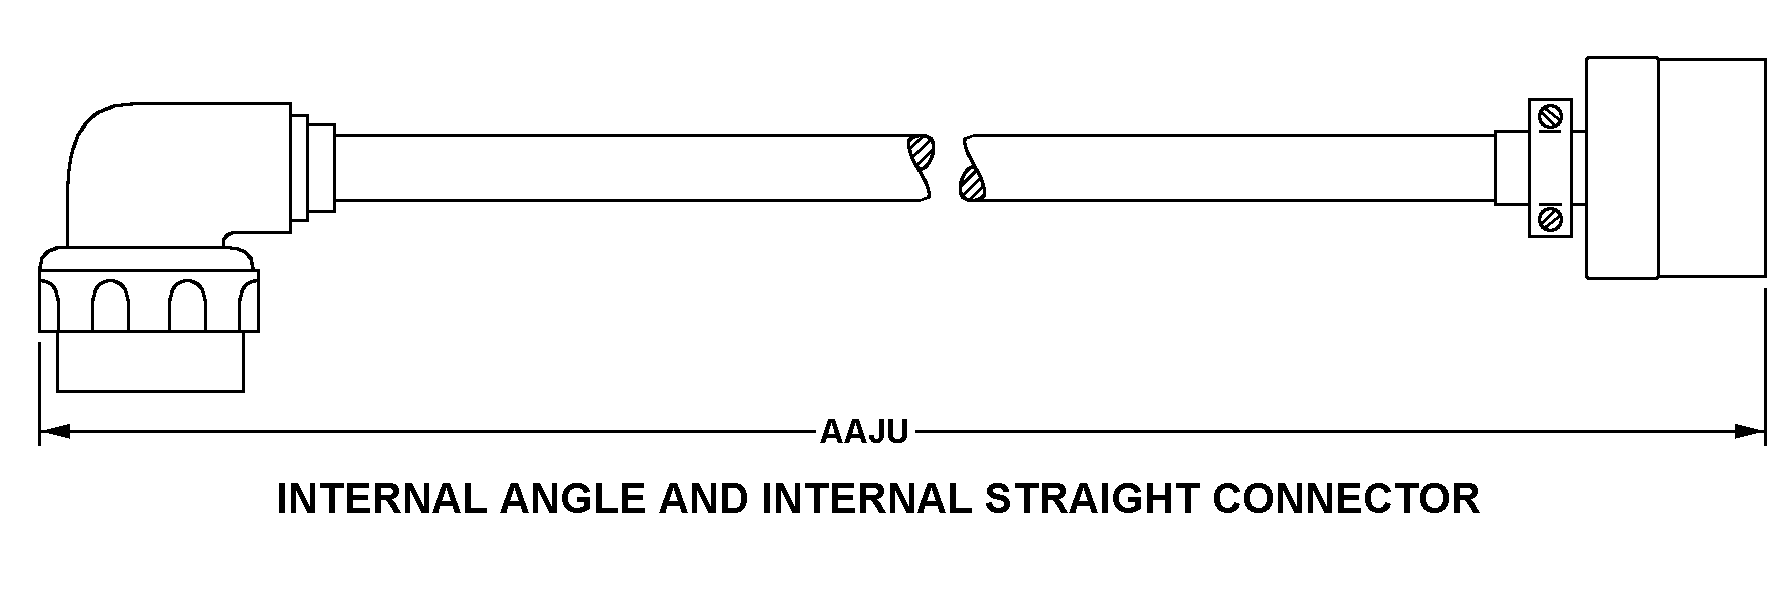 INTERNAL ANGLE AND INTERNAL STRAIGHT CONNECTOR style nsn 6150-01-261-5688